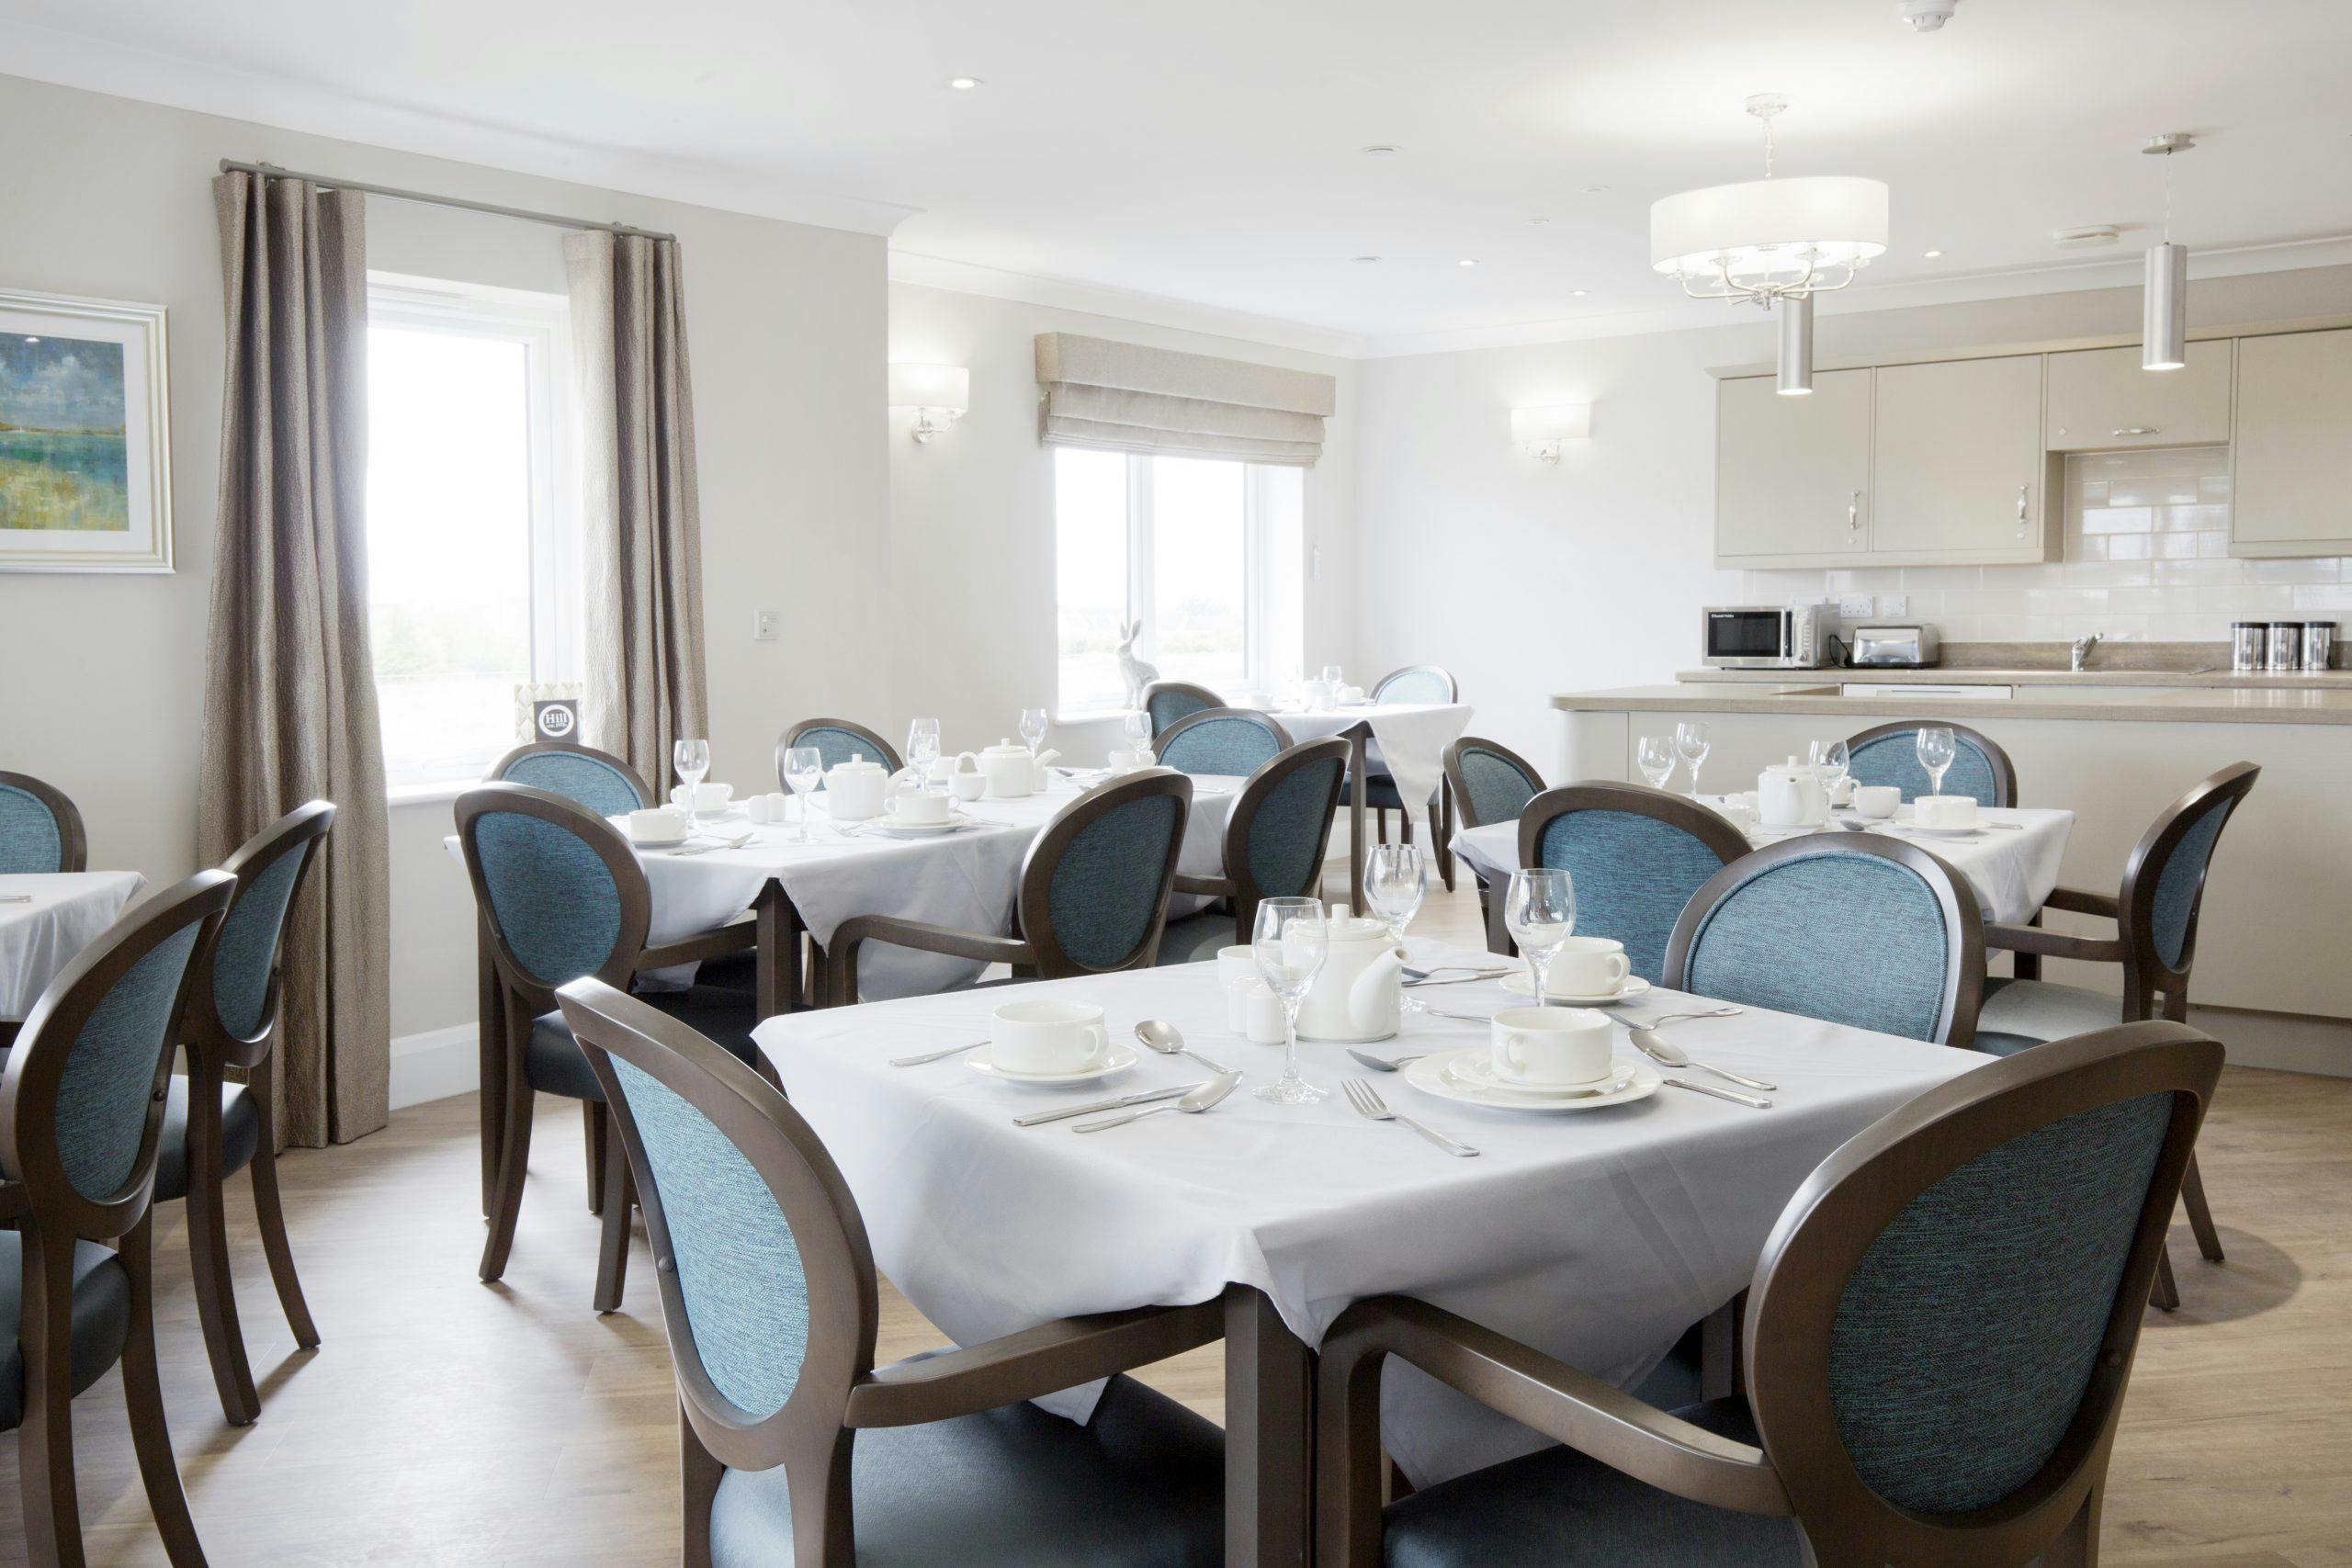 Dining are at Henley House Care Home, Ipswich, Suffolk